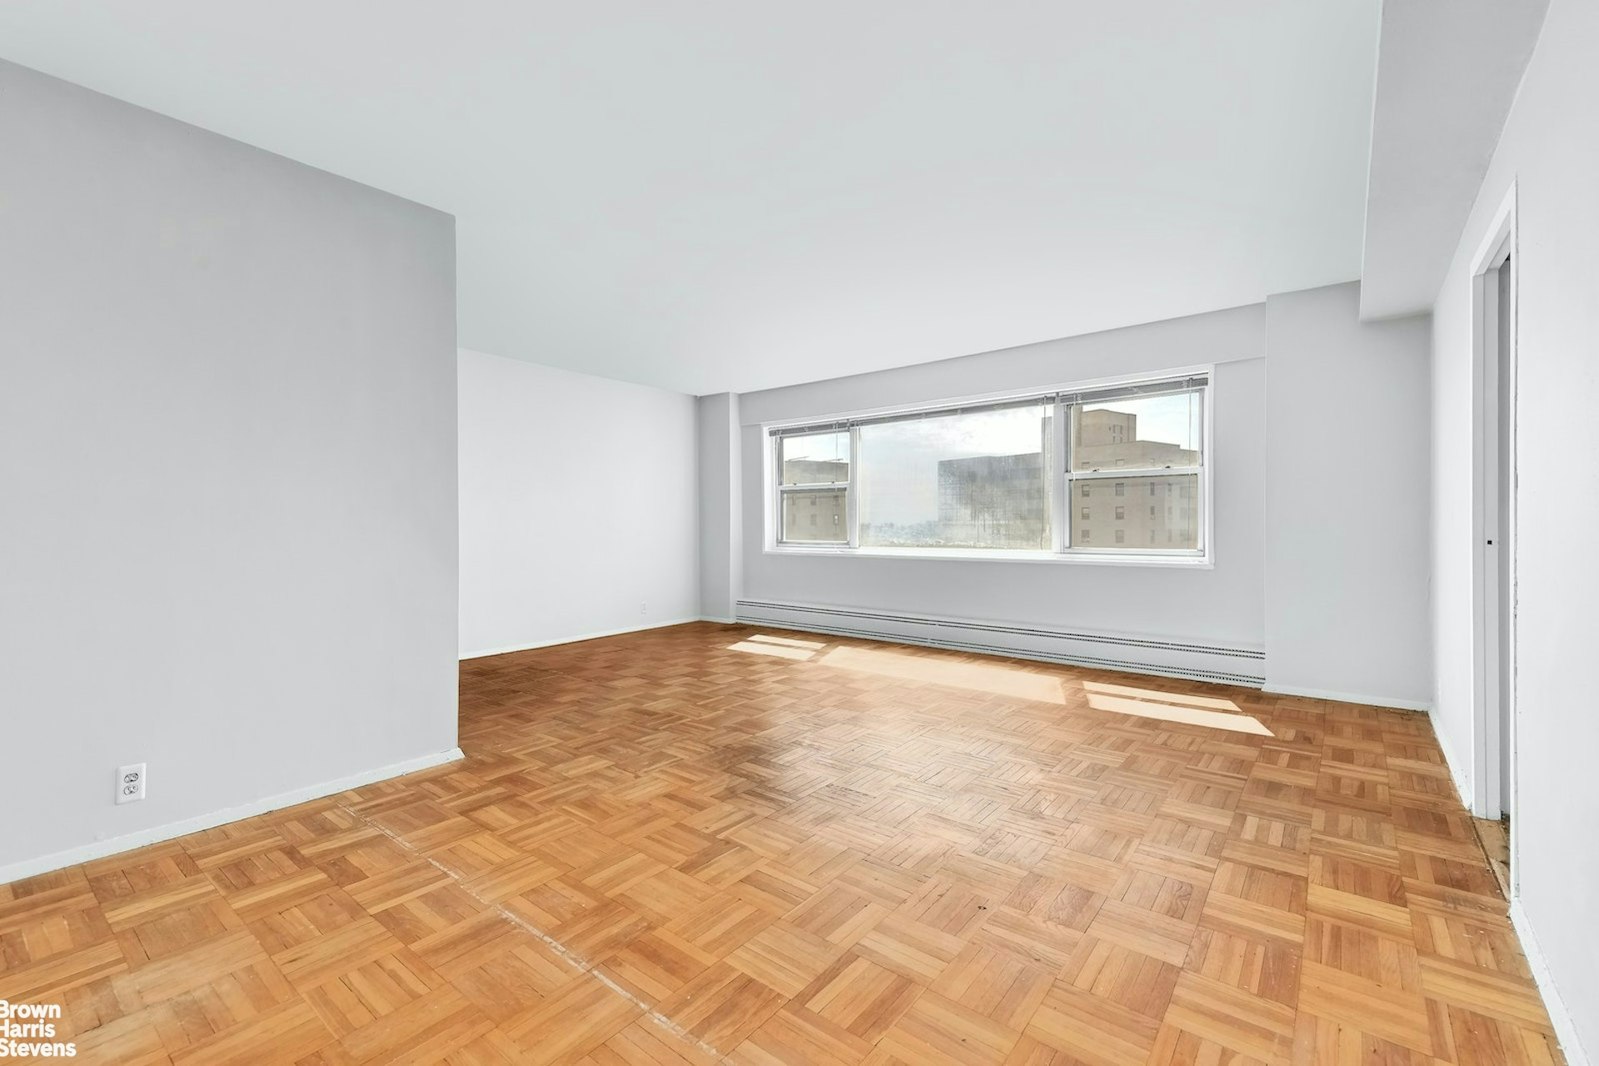 a view of empty room with wooden floor